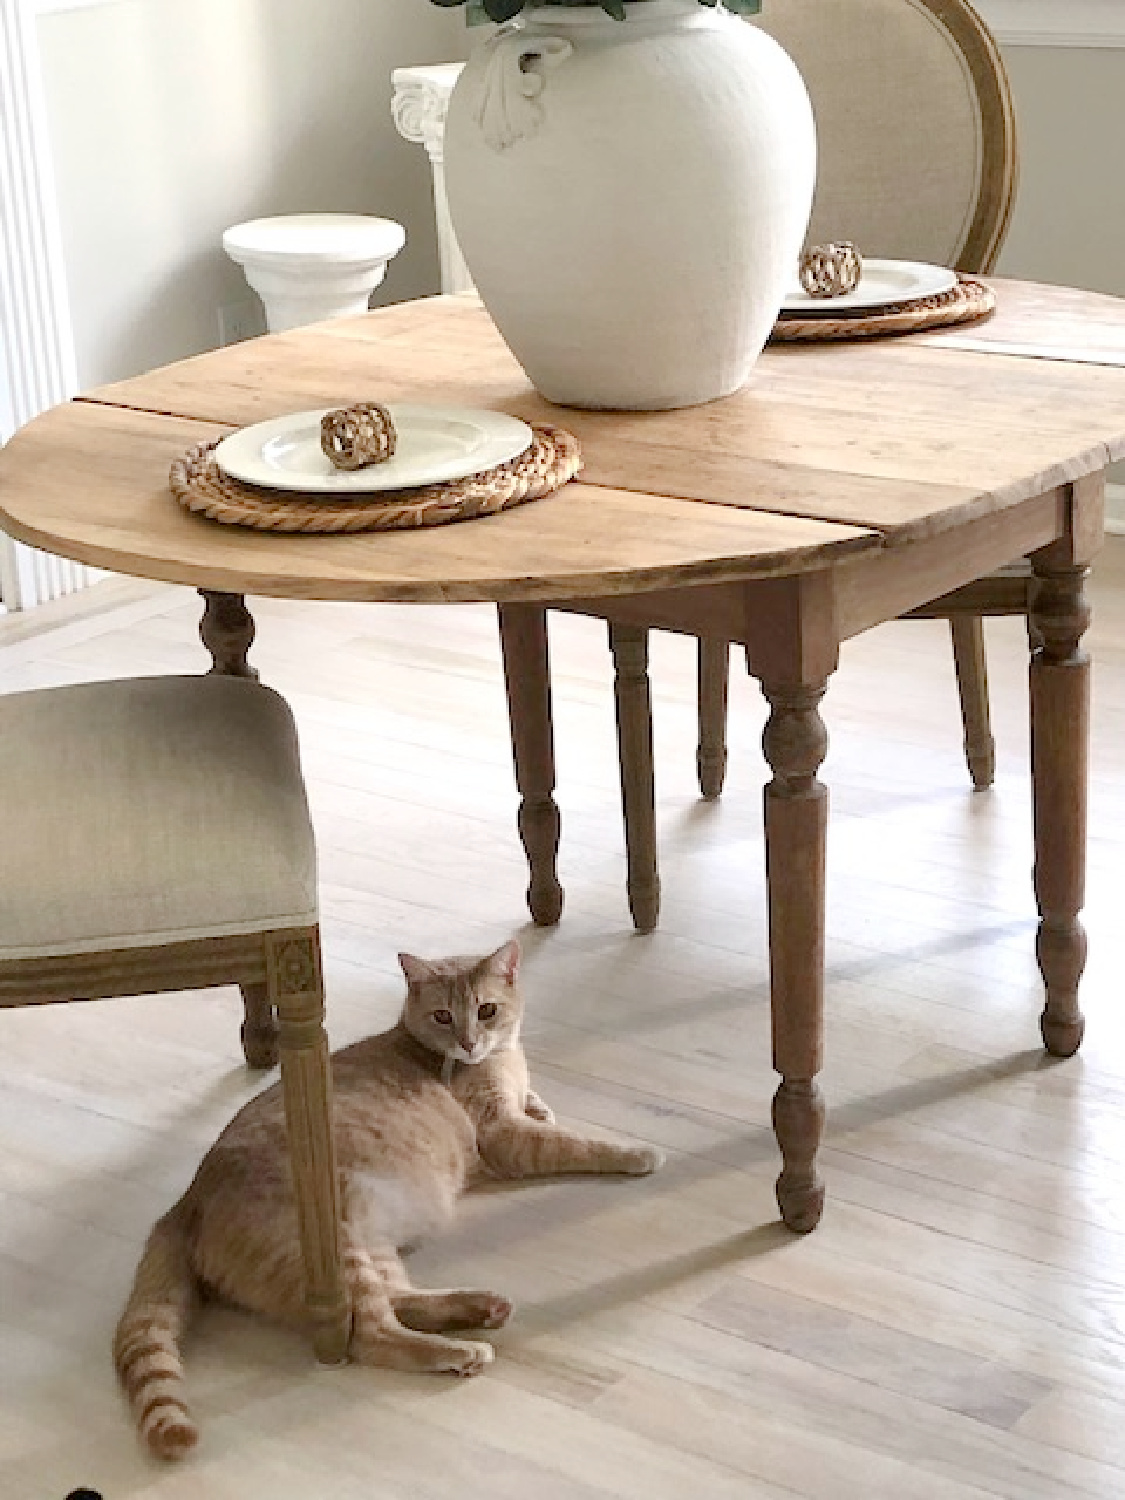 Primitive dining table, whitewashed hardwood flooring and tabby under table - Hello Lovely Studio. #tabbycats #diningroomtable